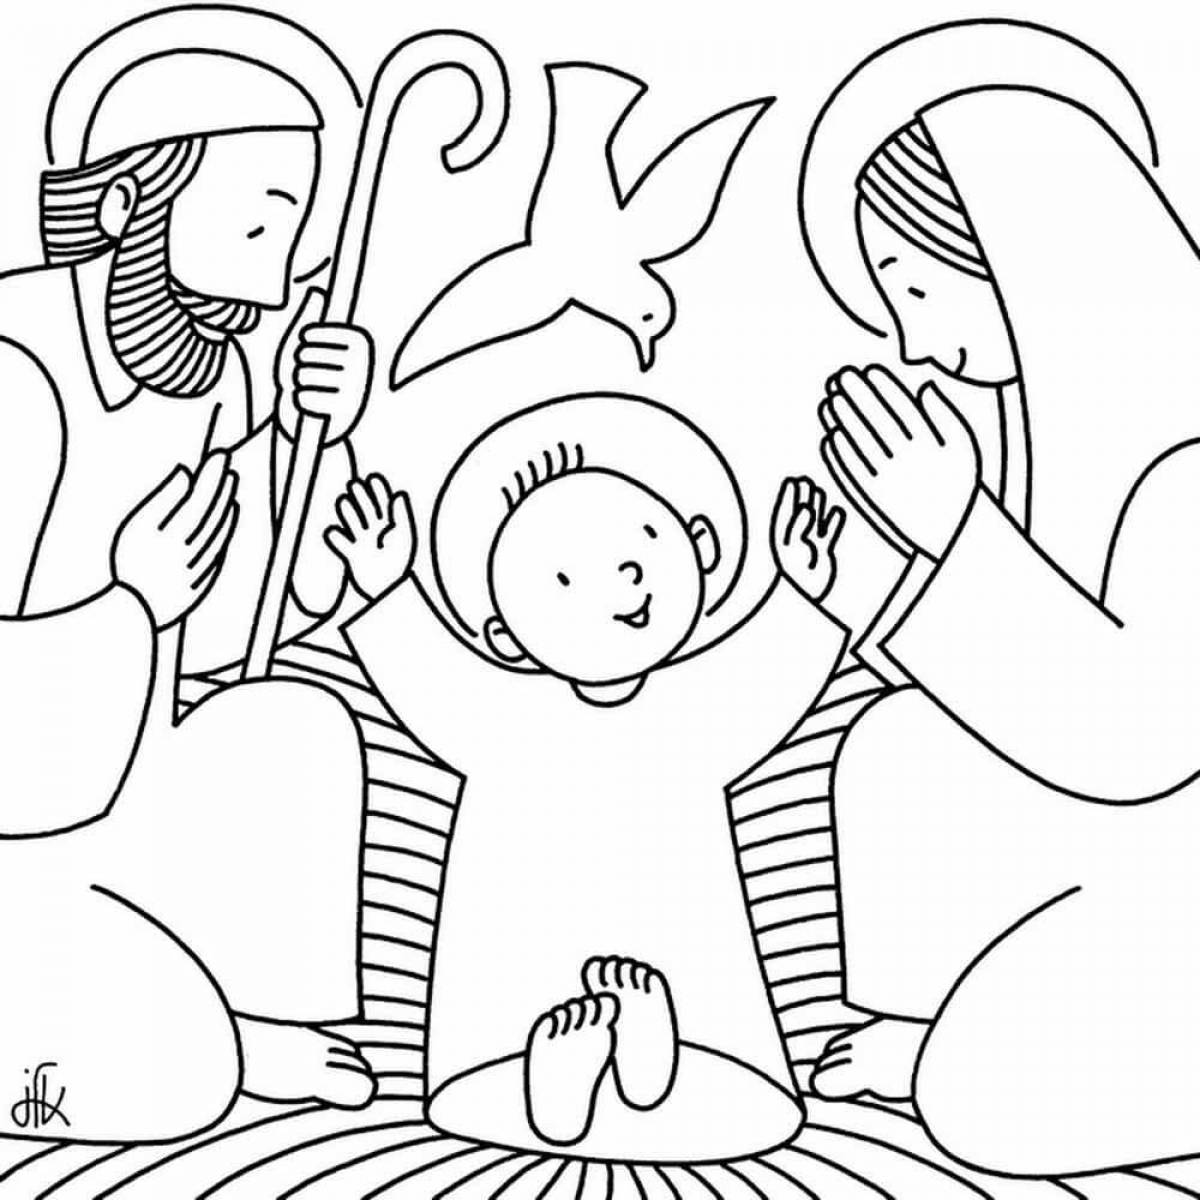 Children's Christmas carol coloring pages